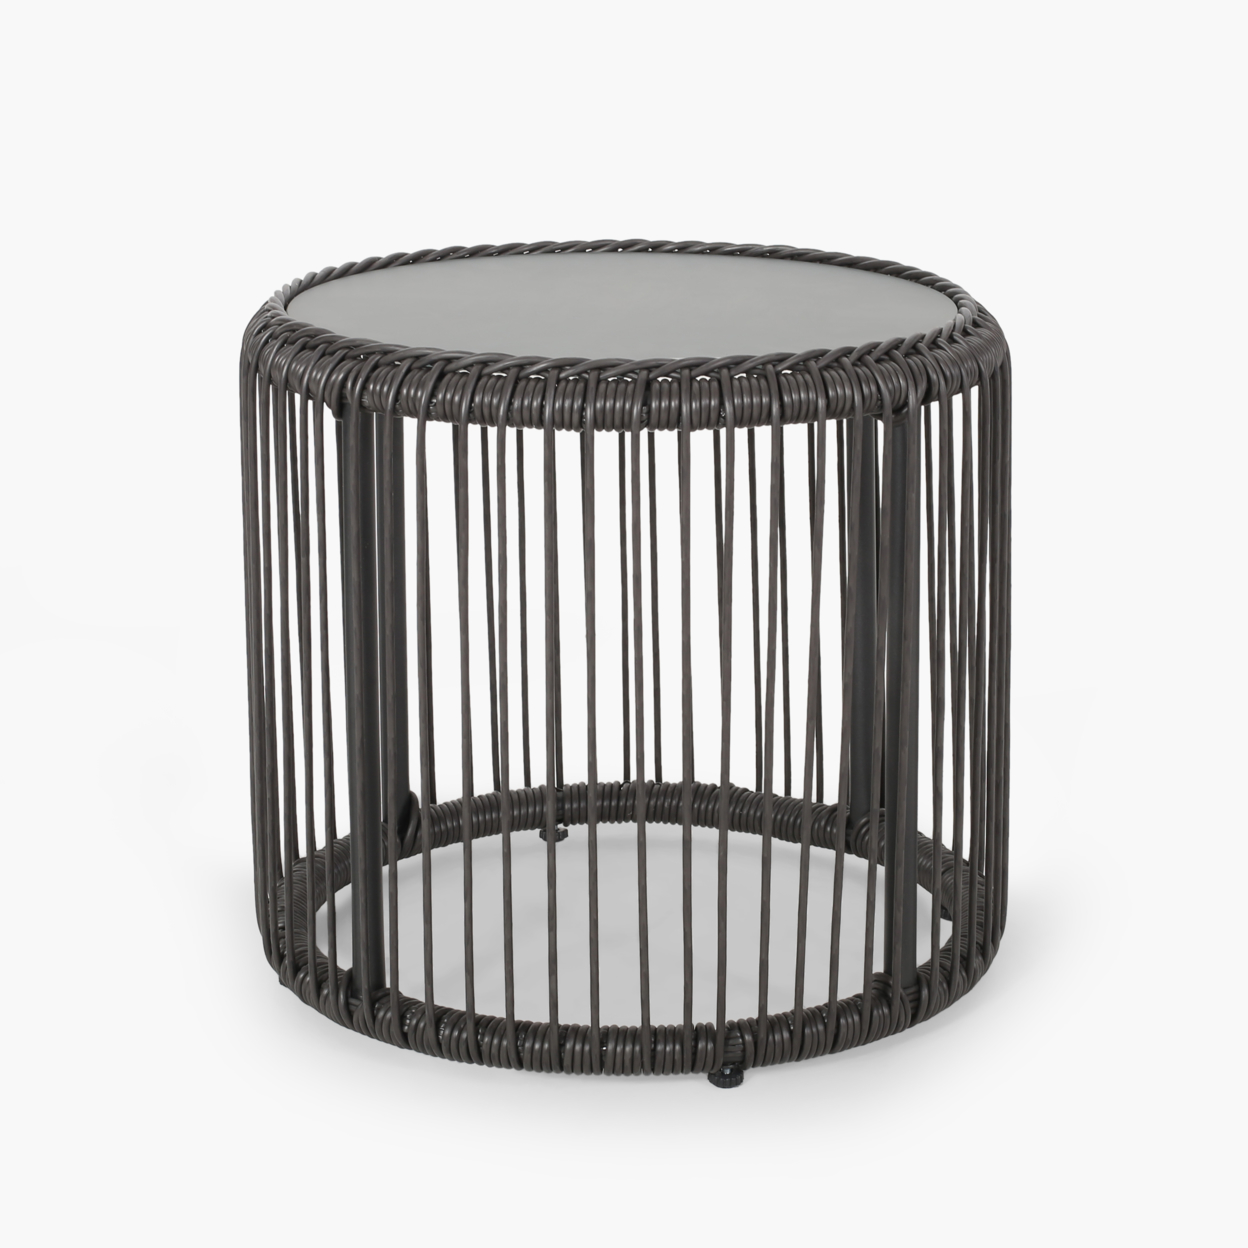 Bunny Outdoor Wicker Side Table With Tempered Glass Top - Gray